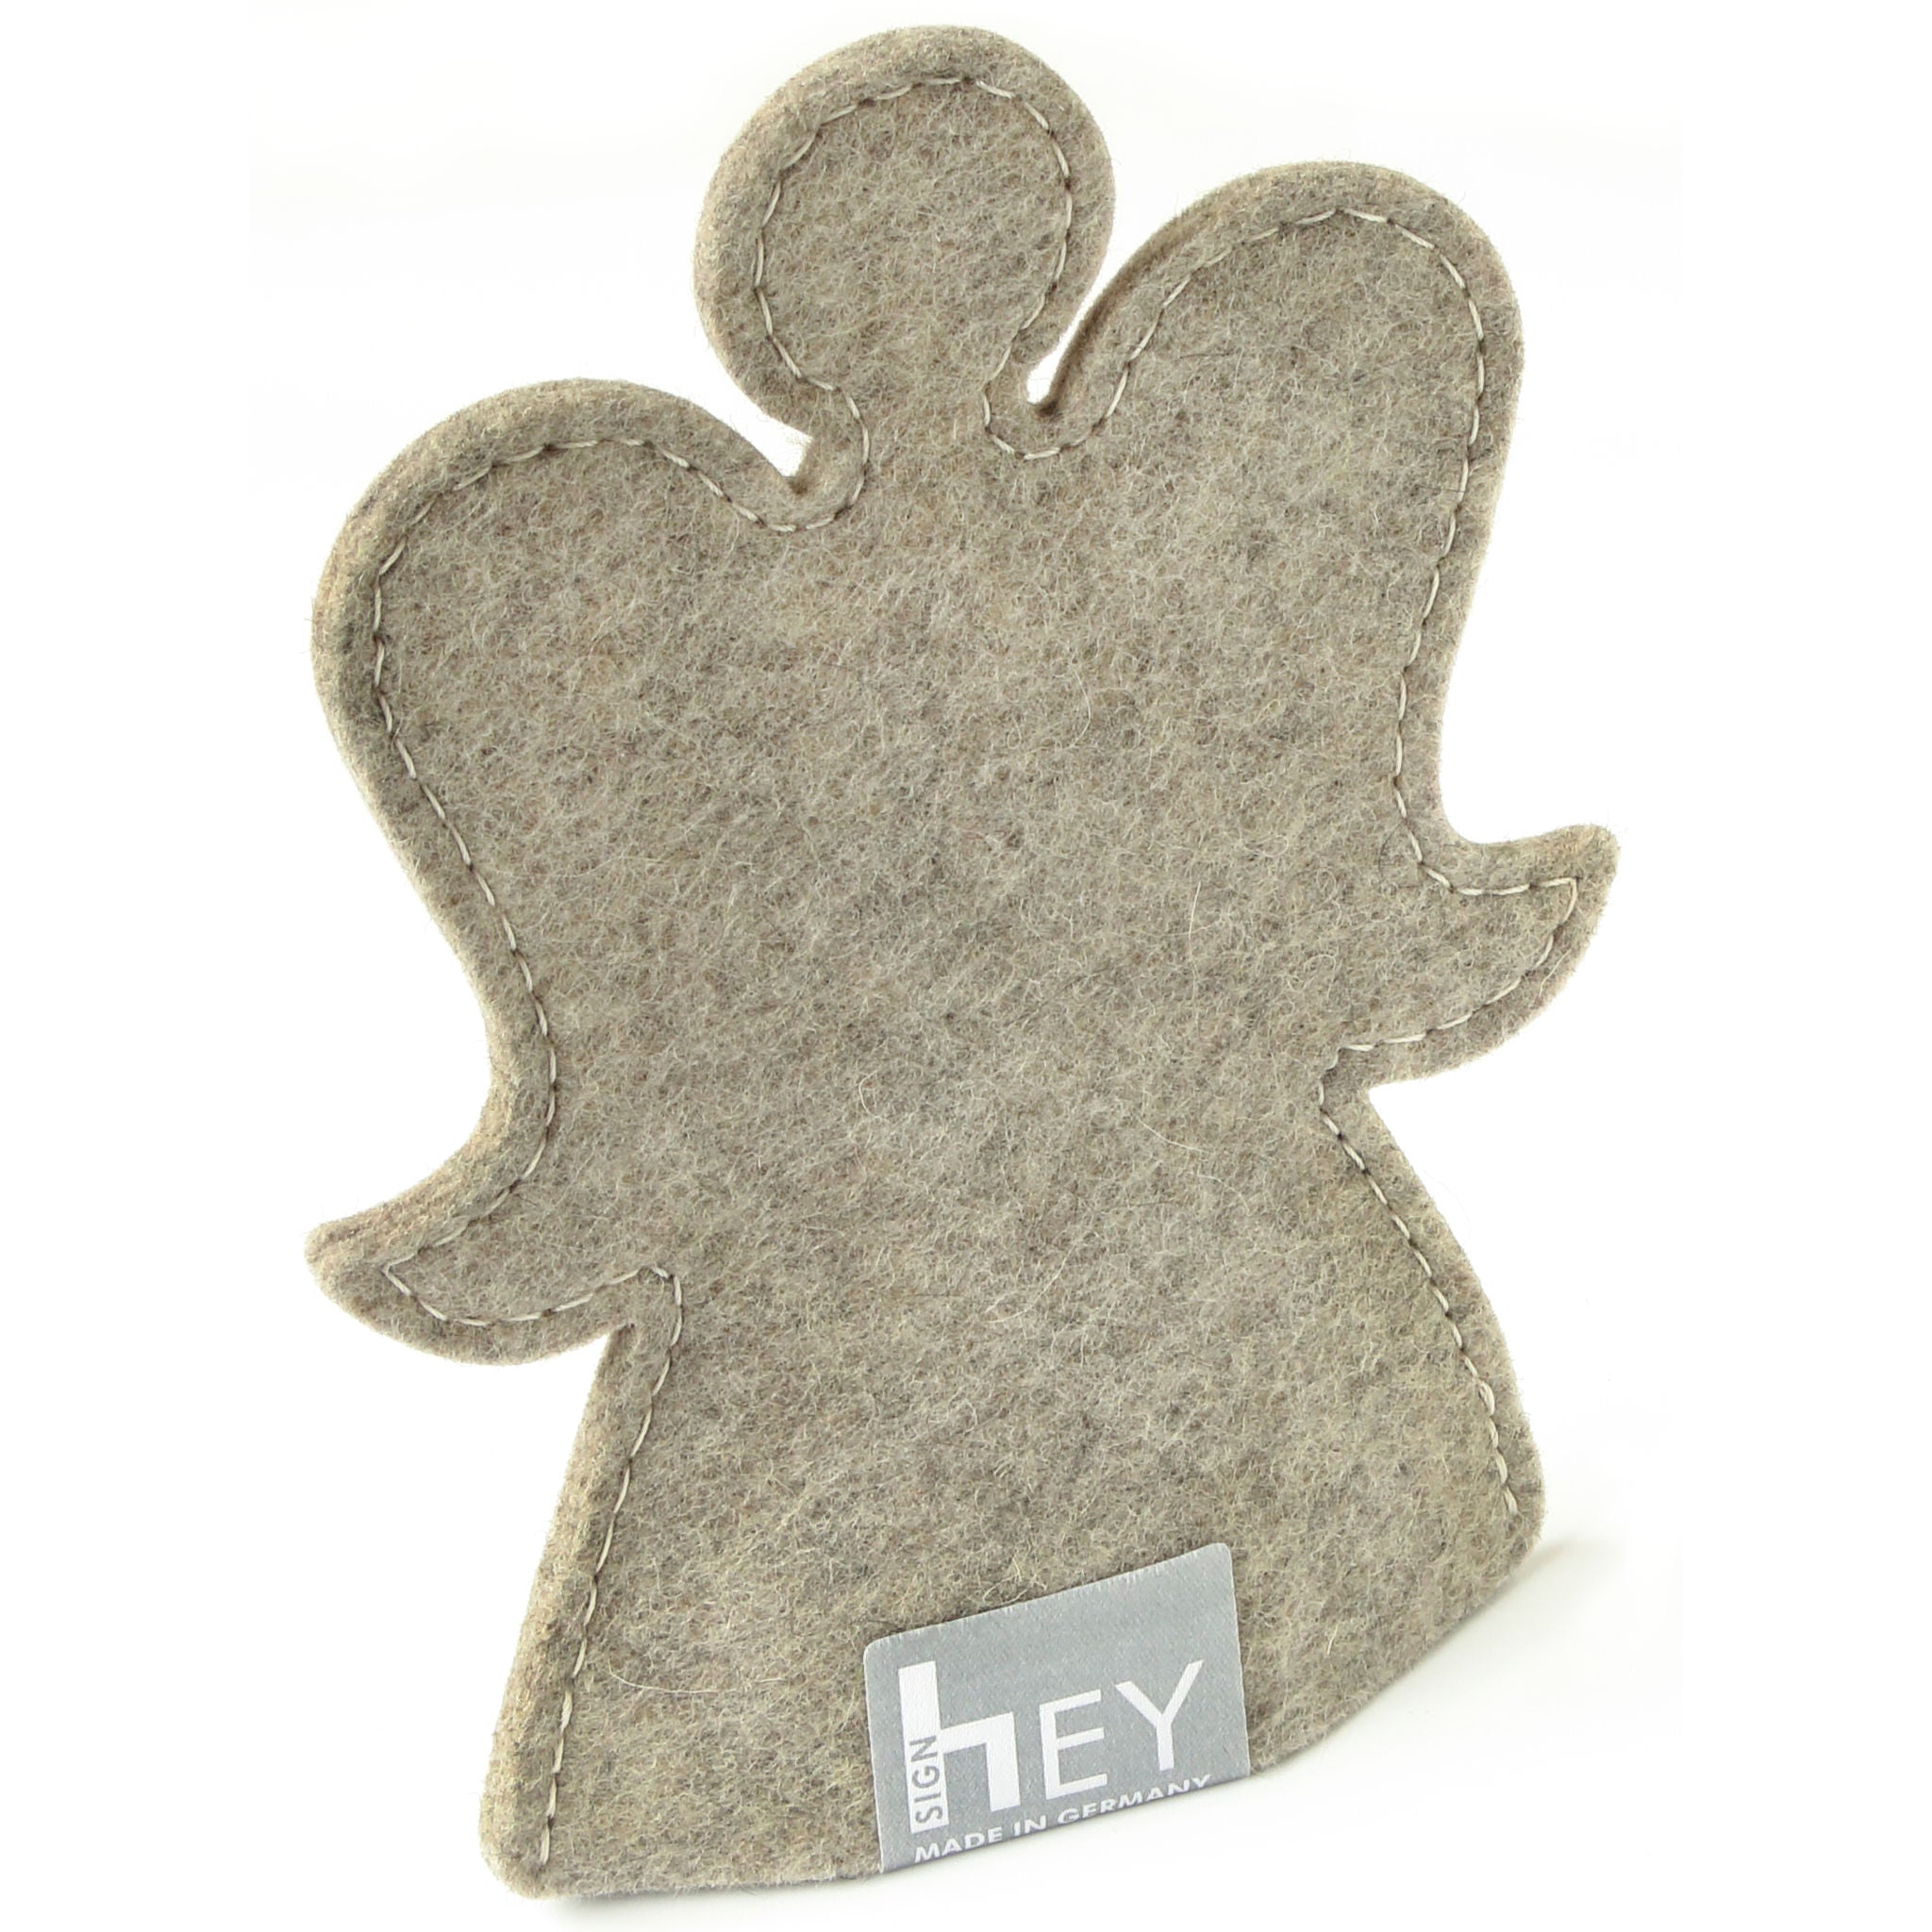 Decorative Angel in Light Grey by Hey-Sign 301151507 Standing